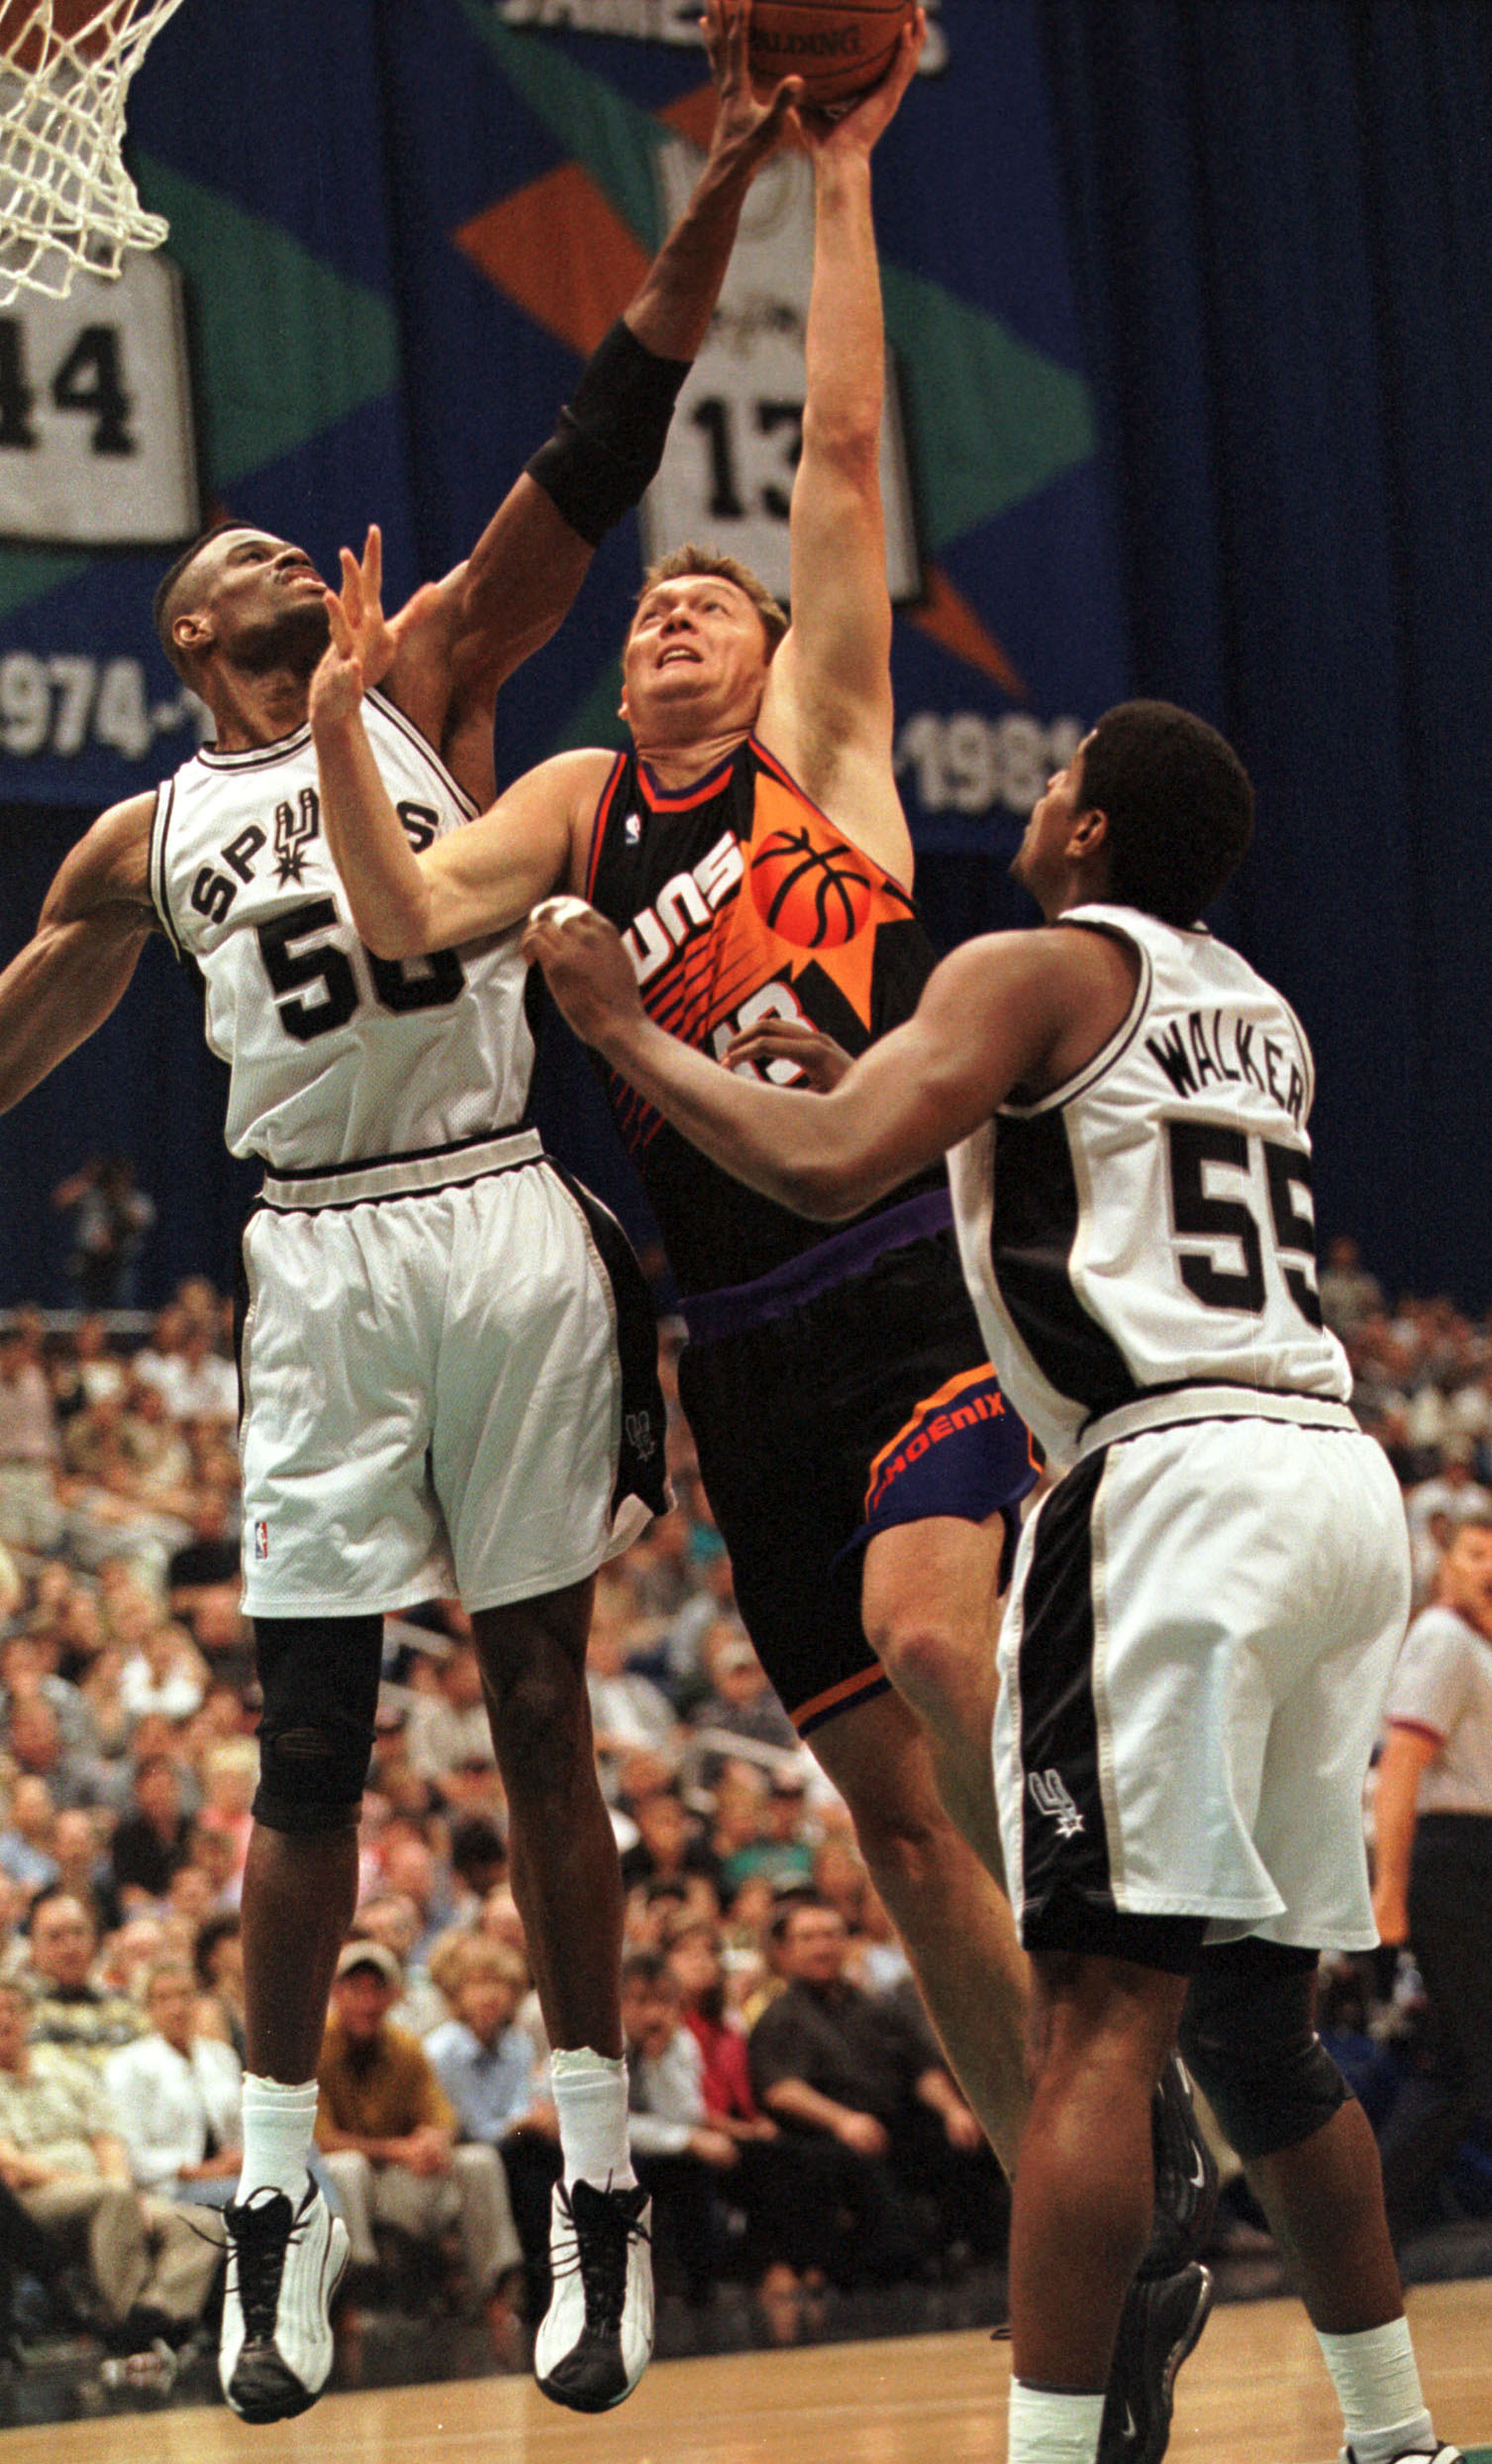 22 Apr 2000:  David Robinson #50 of the San Antonio Spurs blocks a shot by Luc Longley #13 of the Phoenix Suns during the NBA Playoff game at the Alamo Dome in San Antonio,Texas.    Mandatory Credit: Allsport USA/ALLSPORT